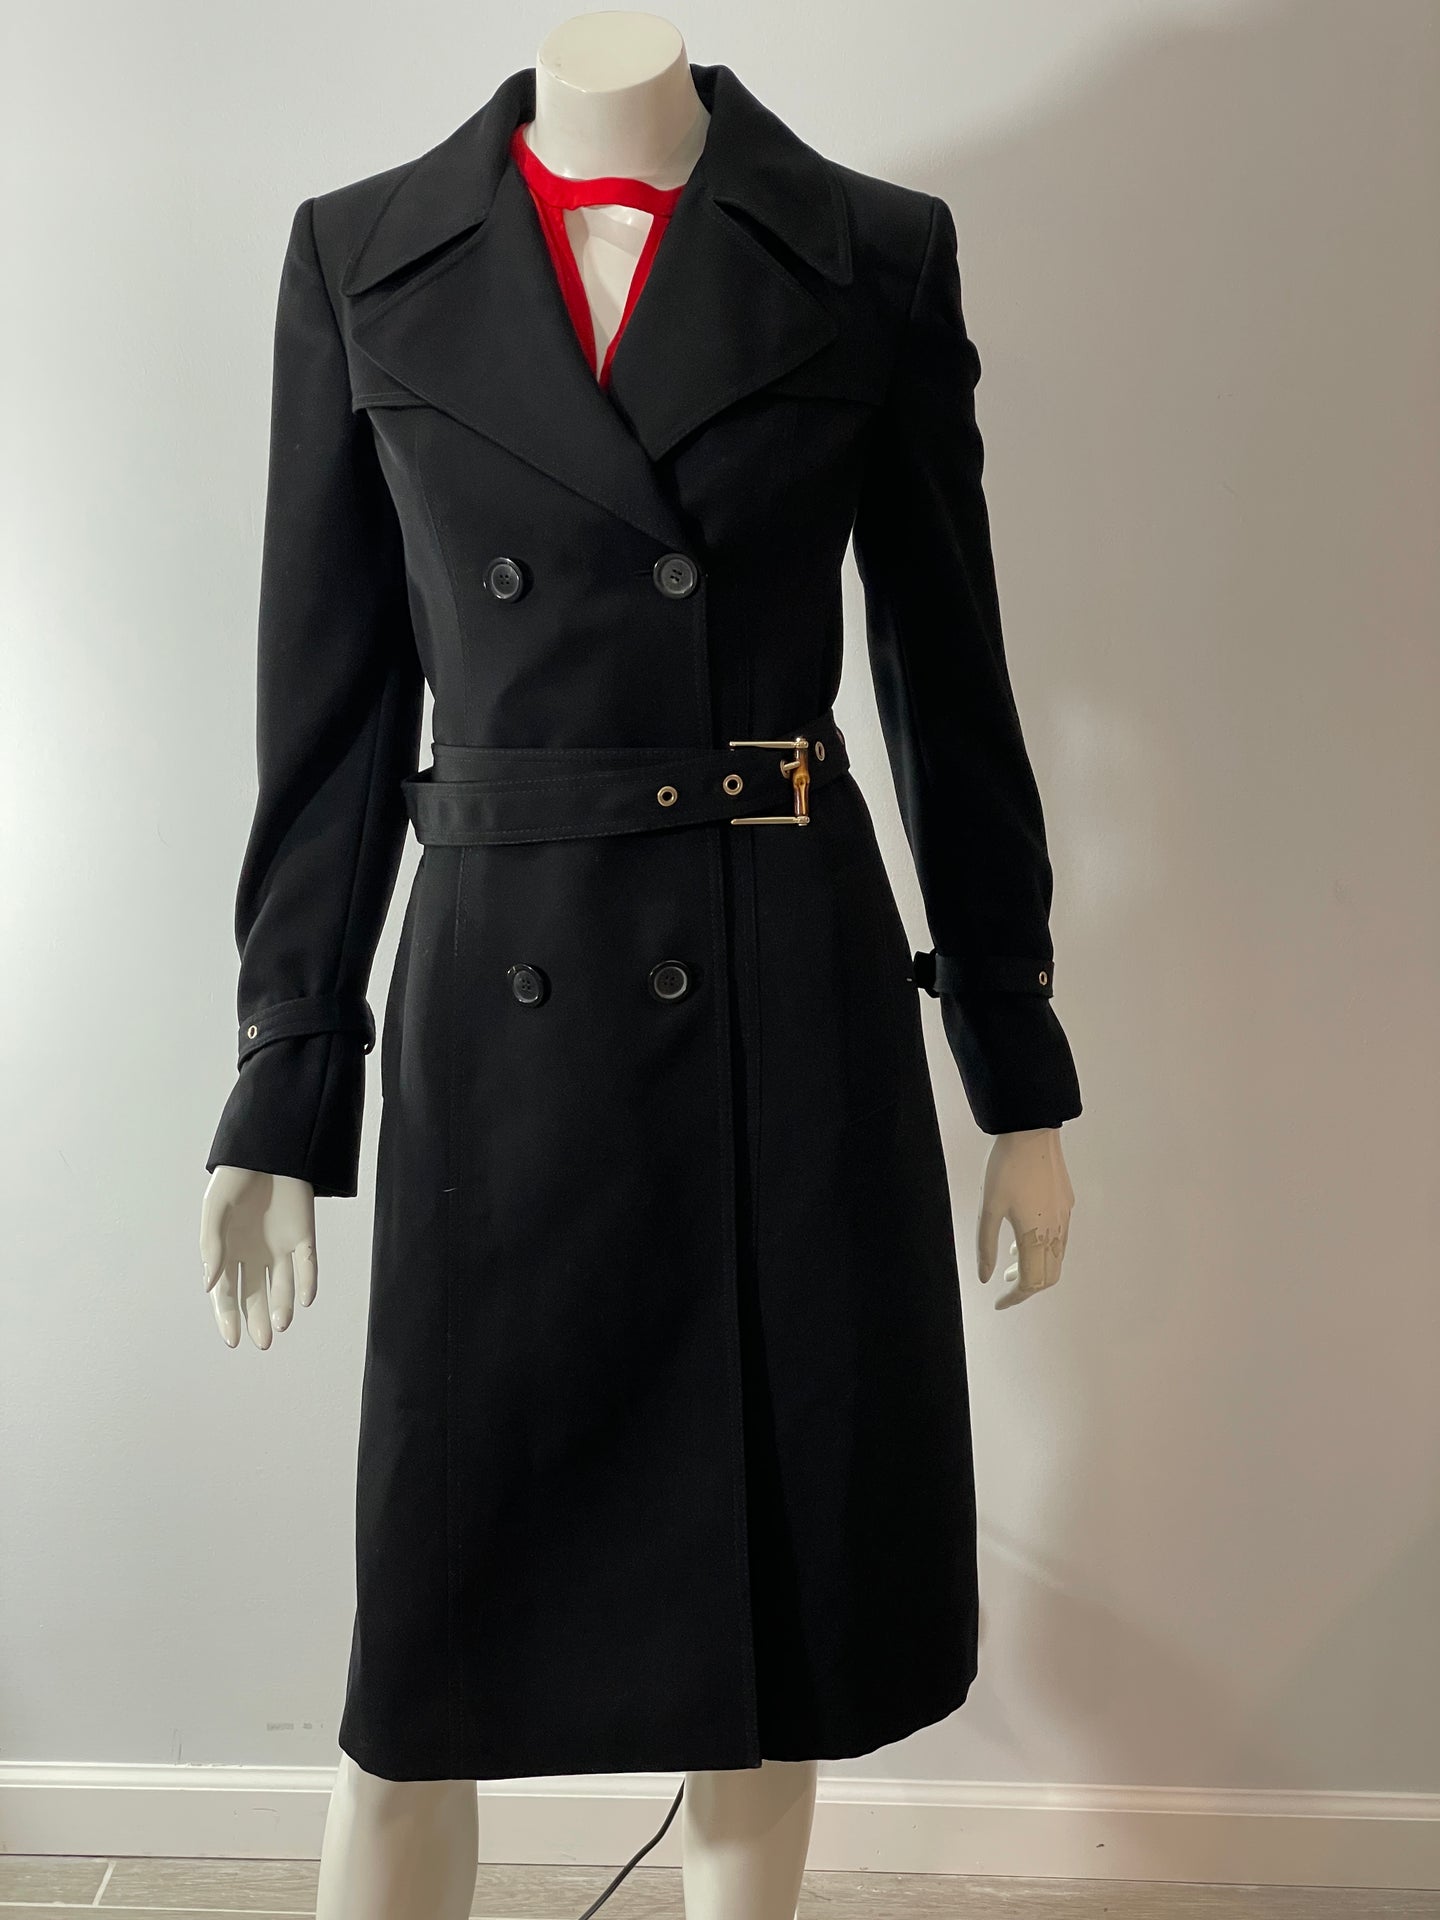 Gucci Black Wool Trench Coat